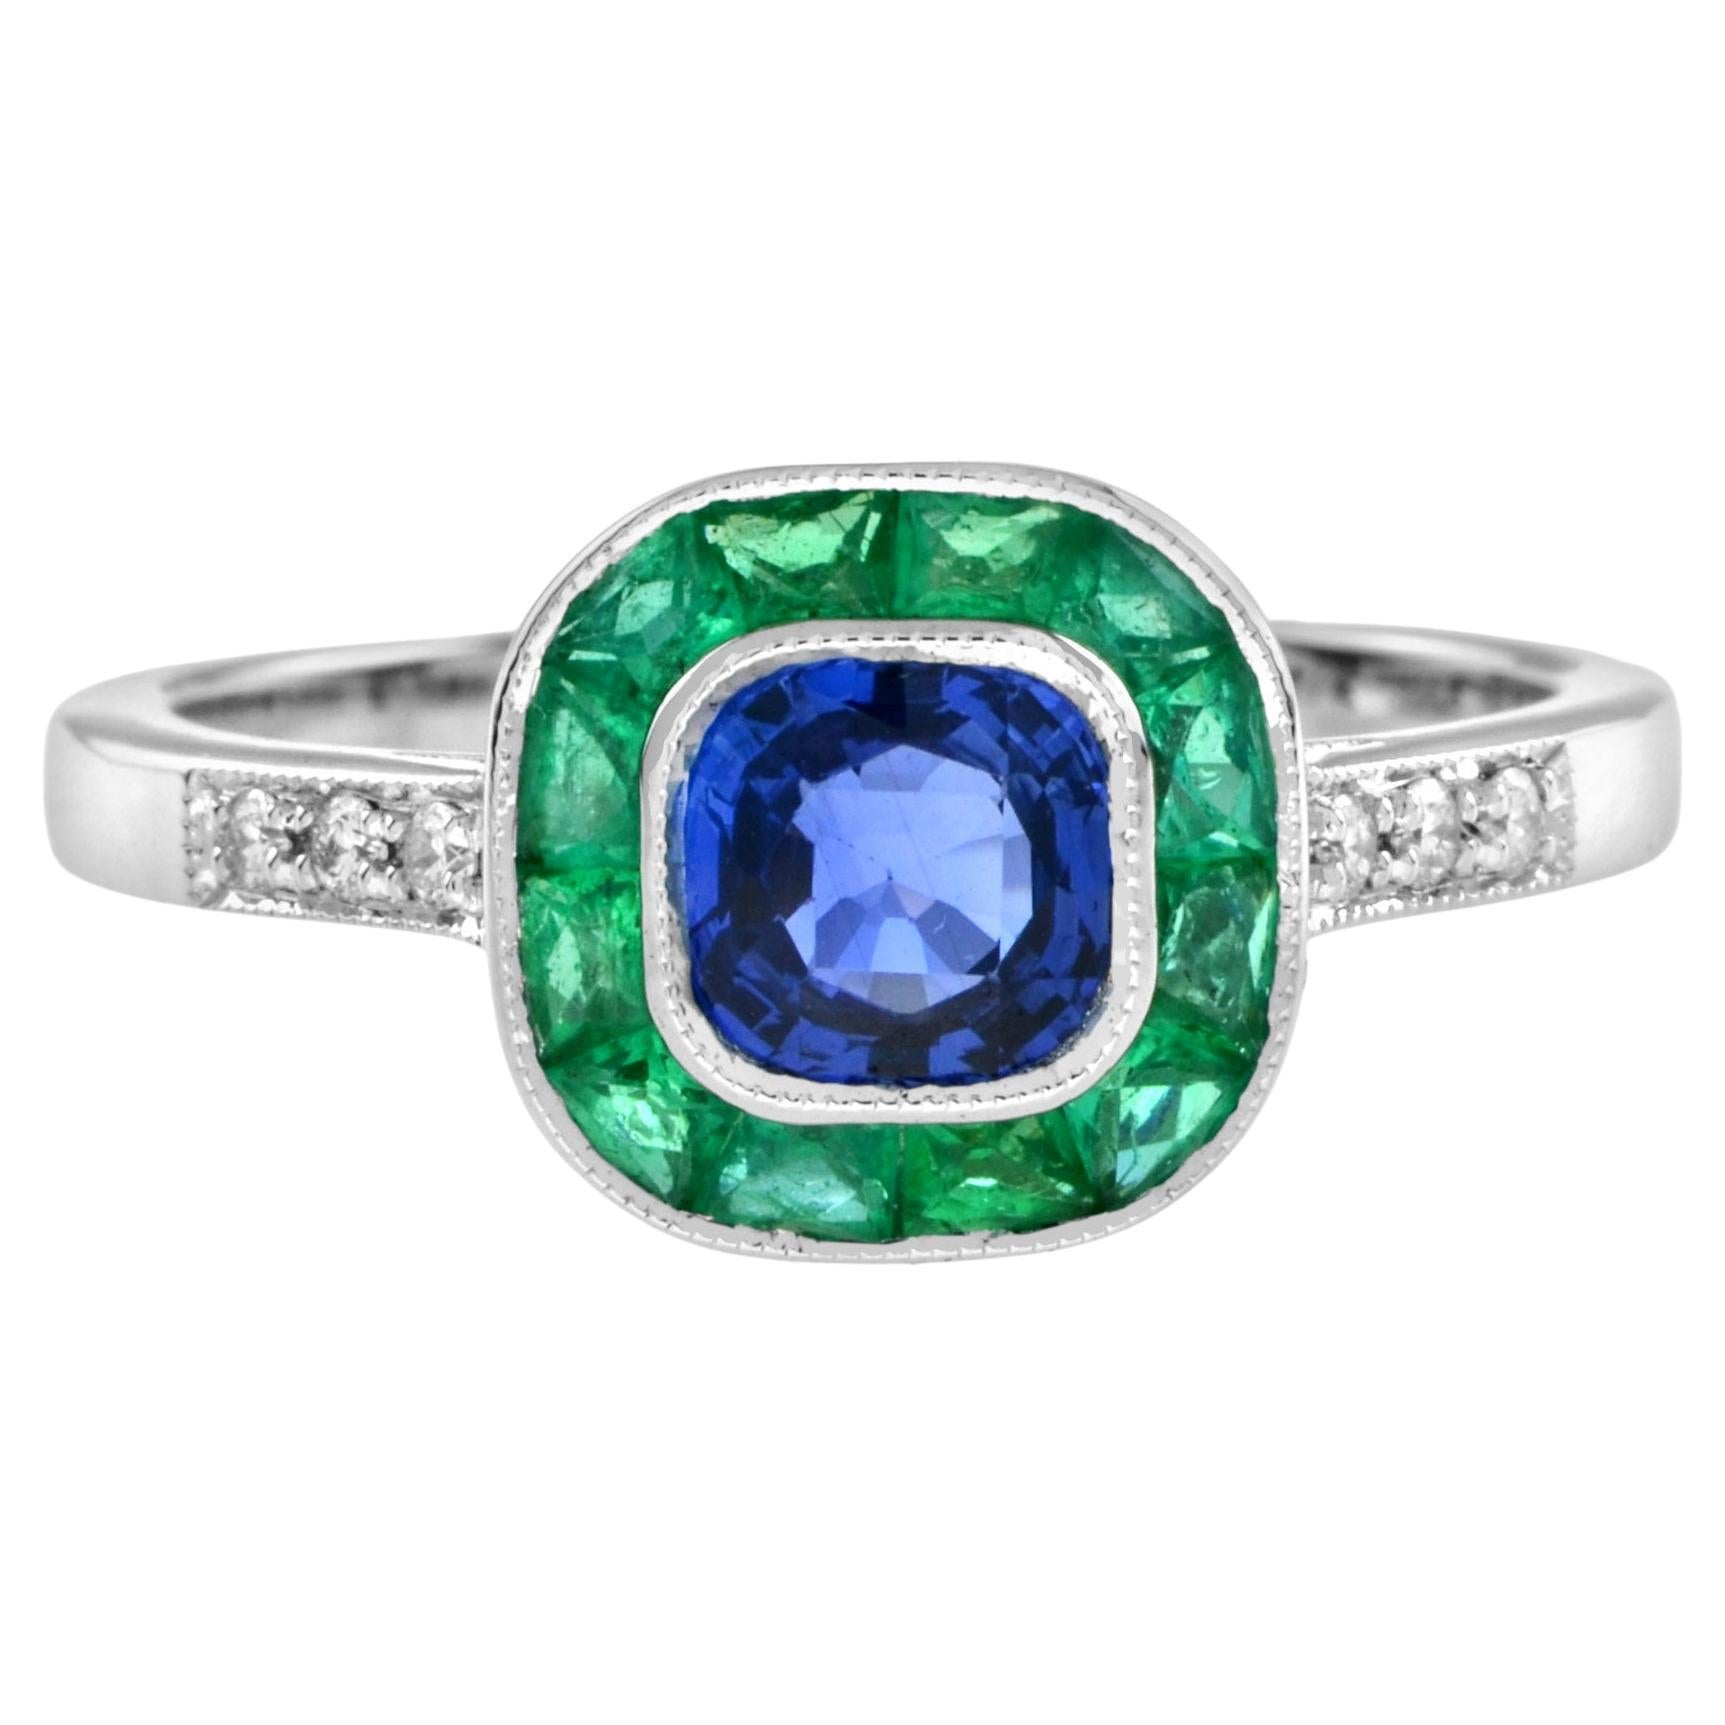 Ceylon Sapphire with Emerald and Diamond Art Deco Style Halo Ring in 18K Gold